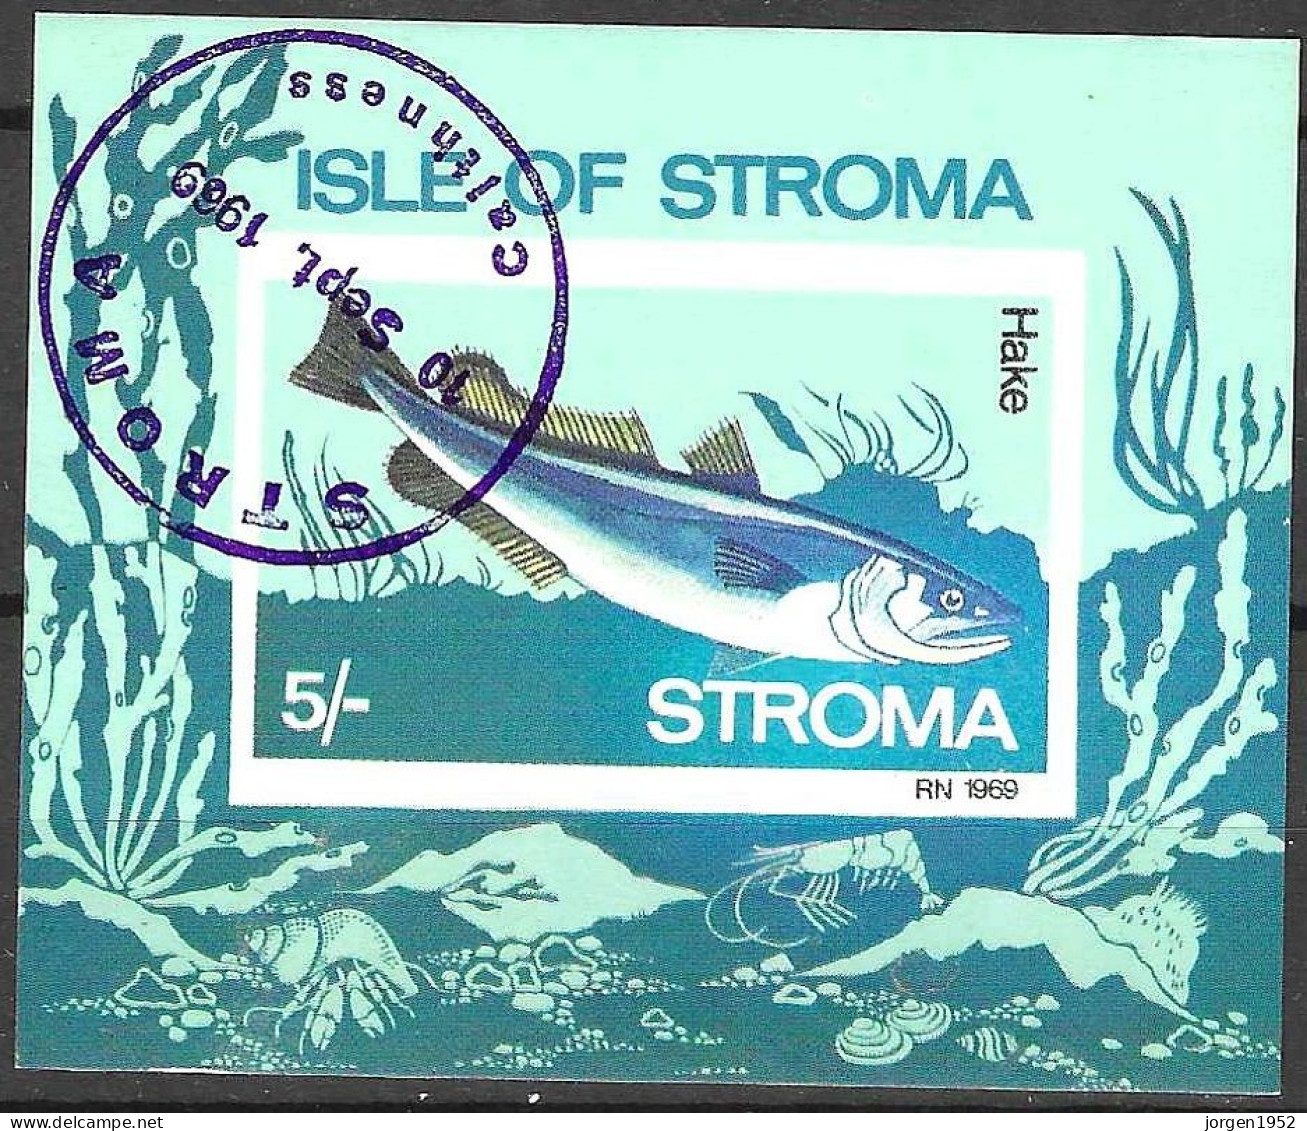 GREAT BRITAIN # SCOTLAND STROMA FROM 1969 STANLEY GIBBONS 04/07 - Cinderelas